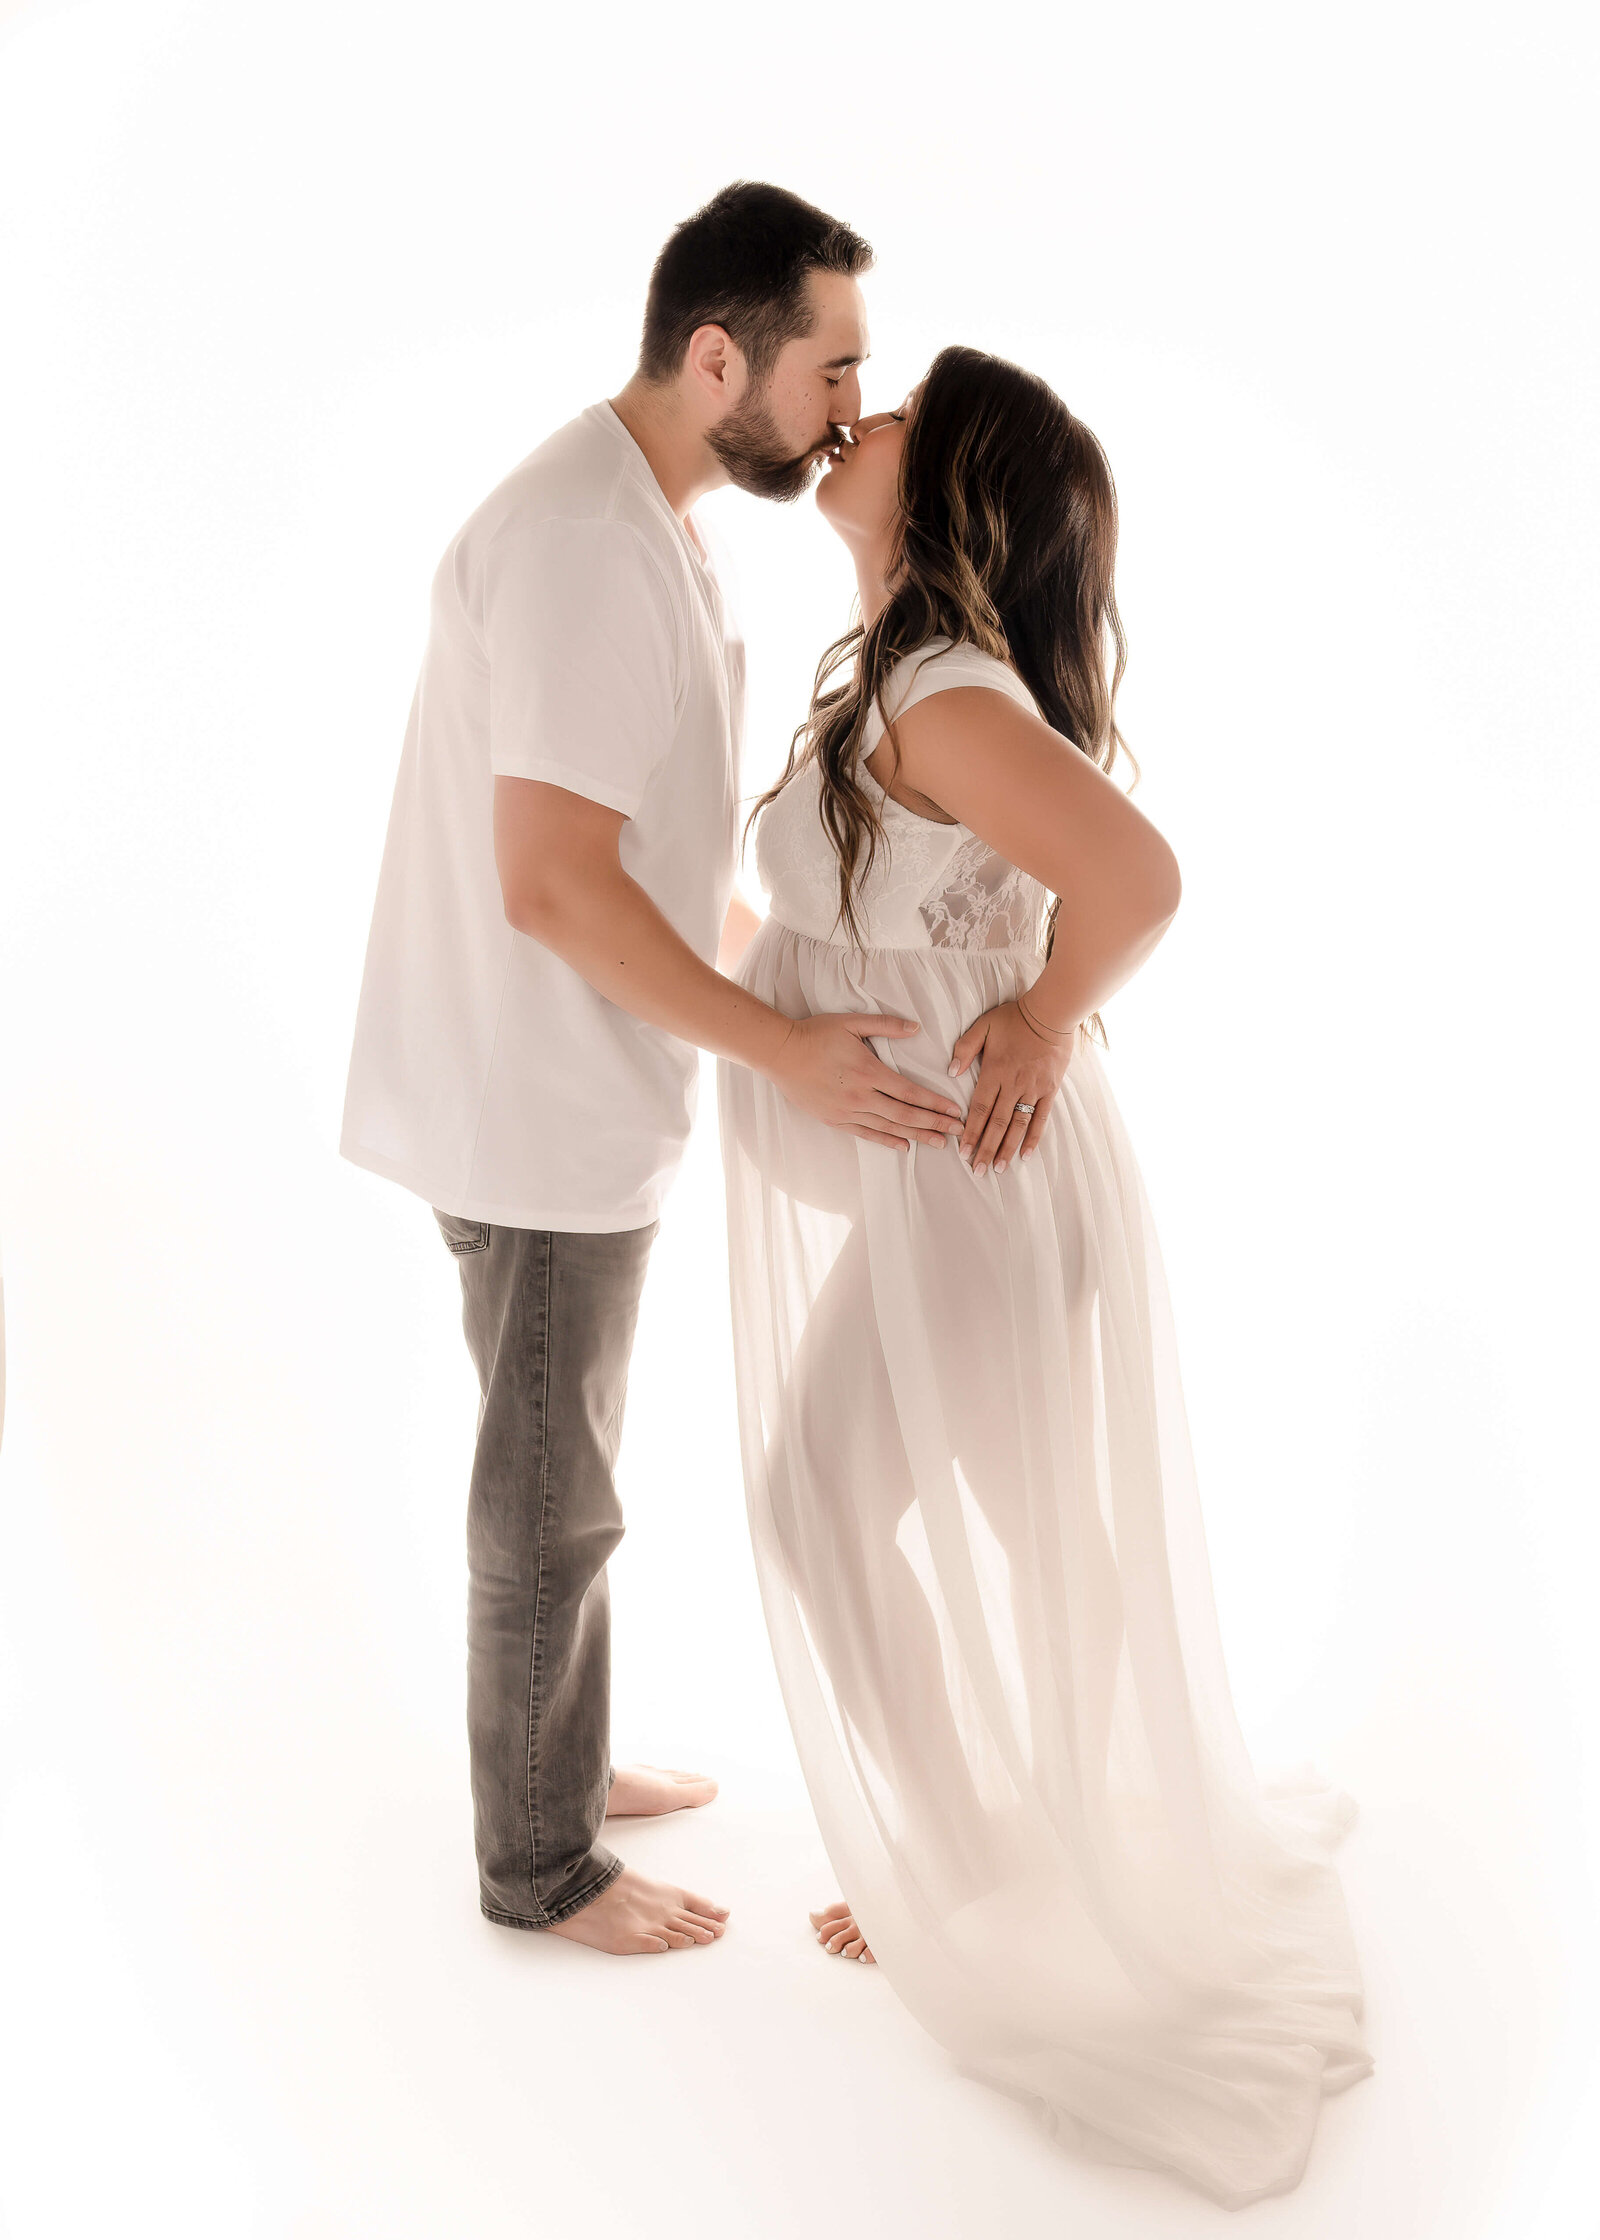 In studio maternity by Ashley Nicole of couple kissing while husband holds bump.